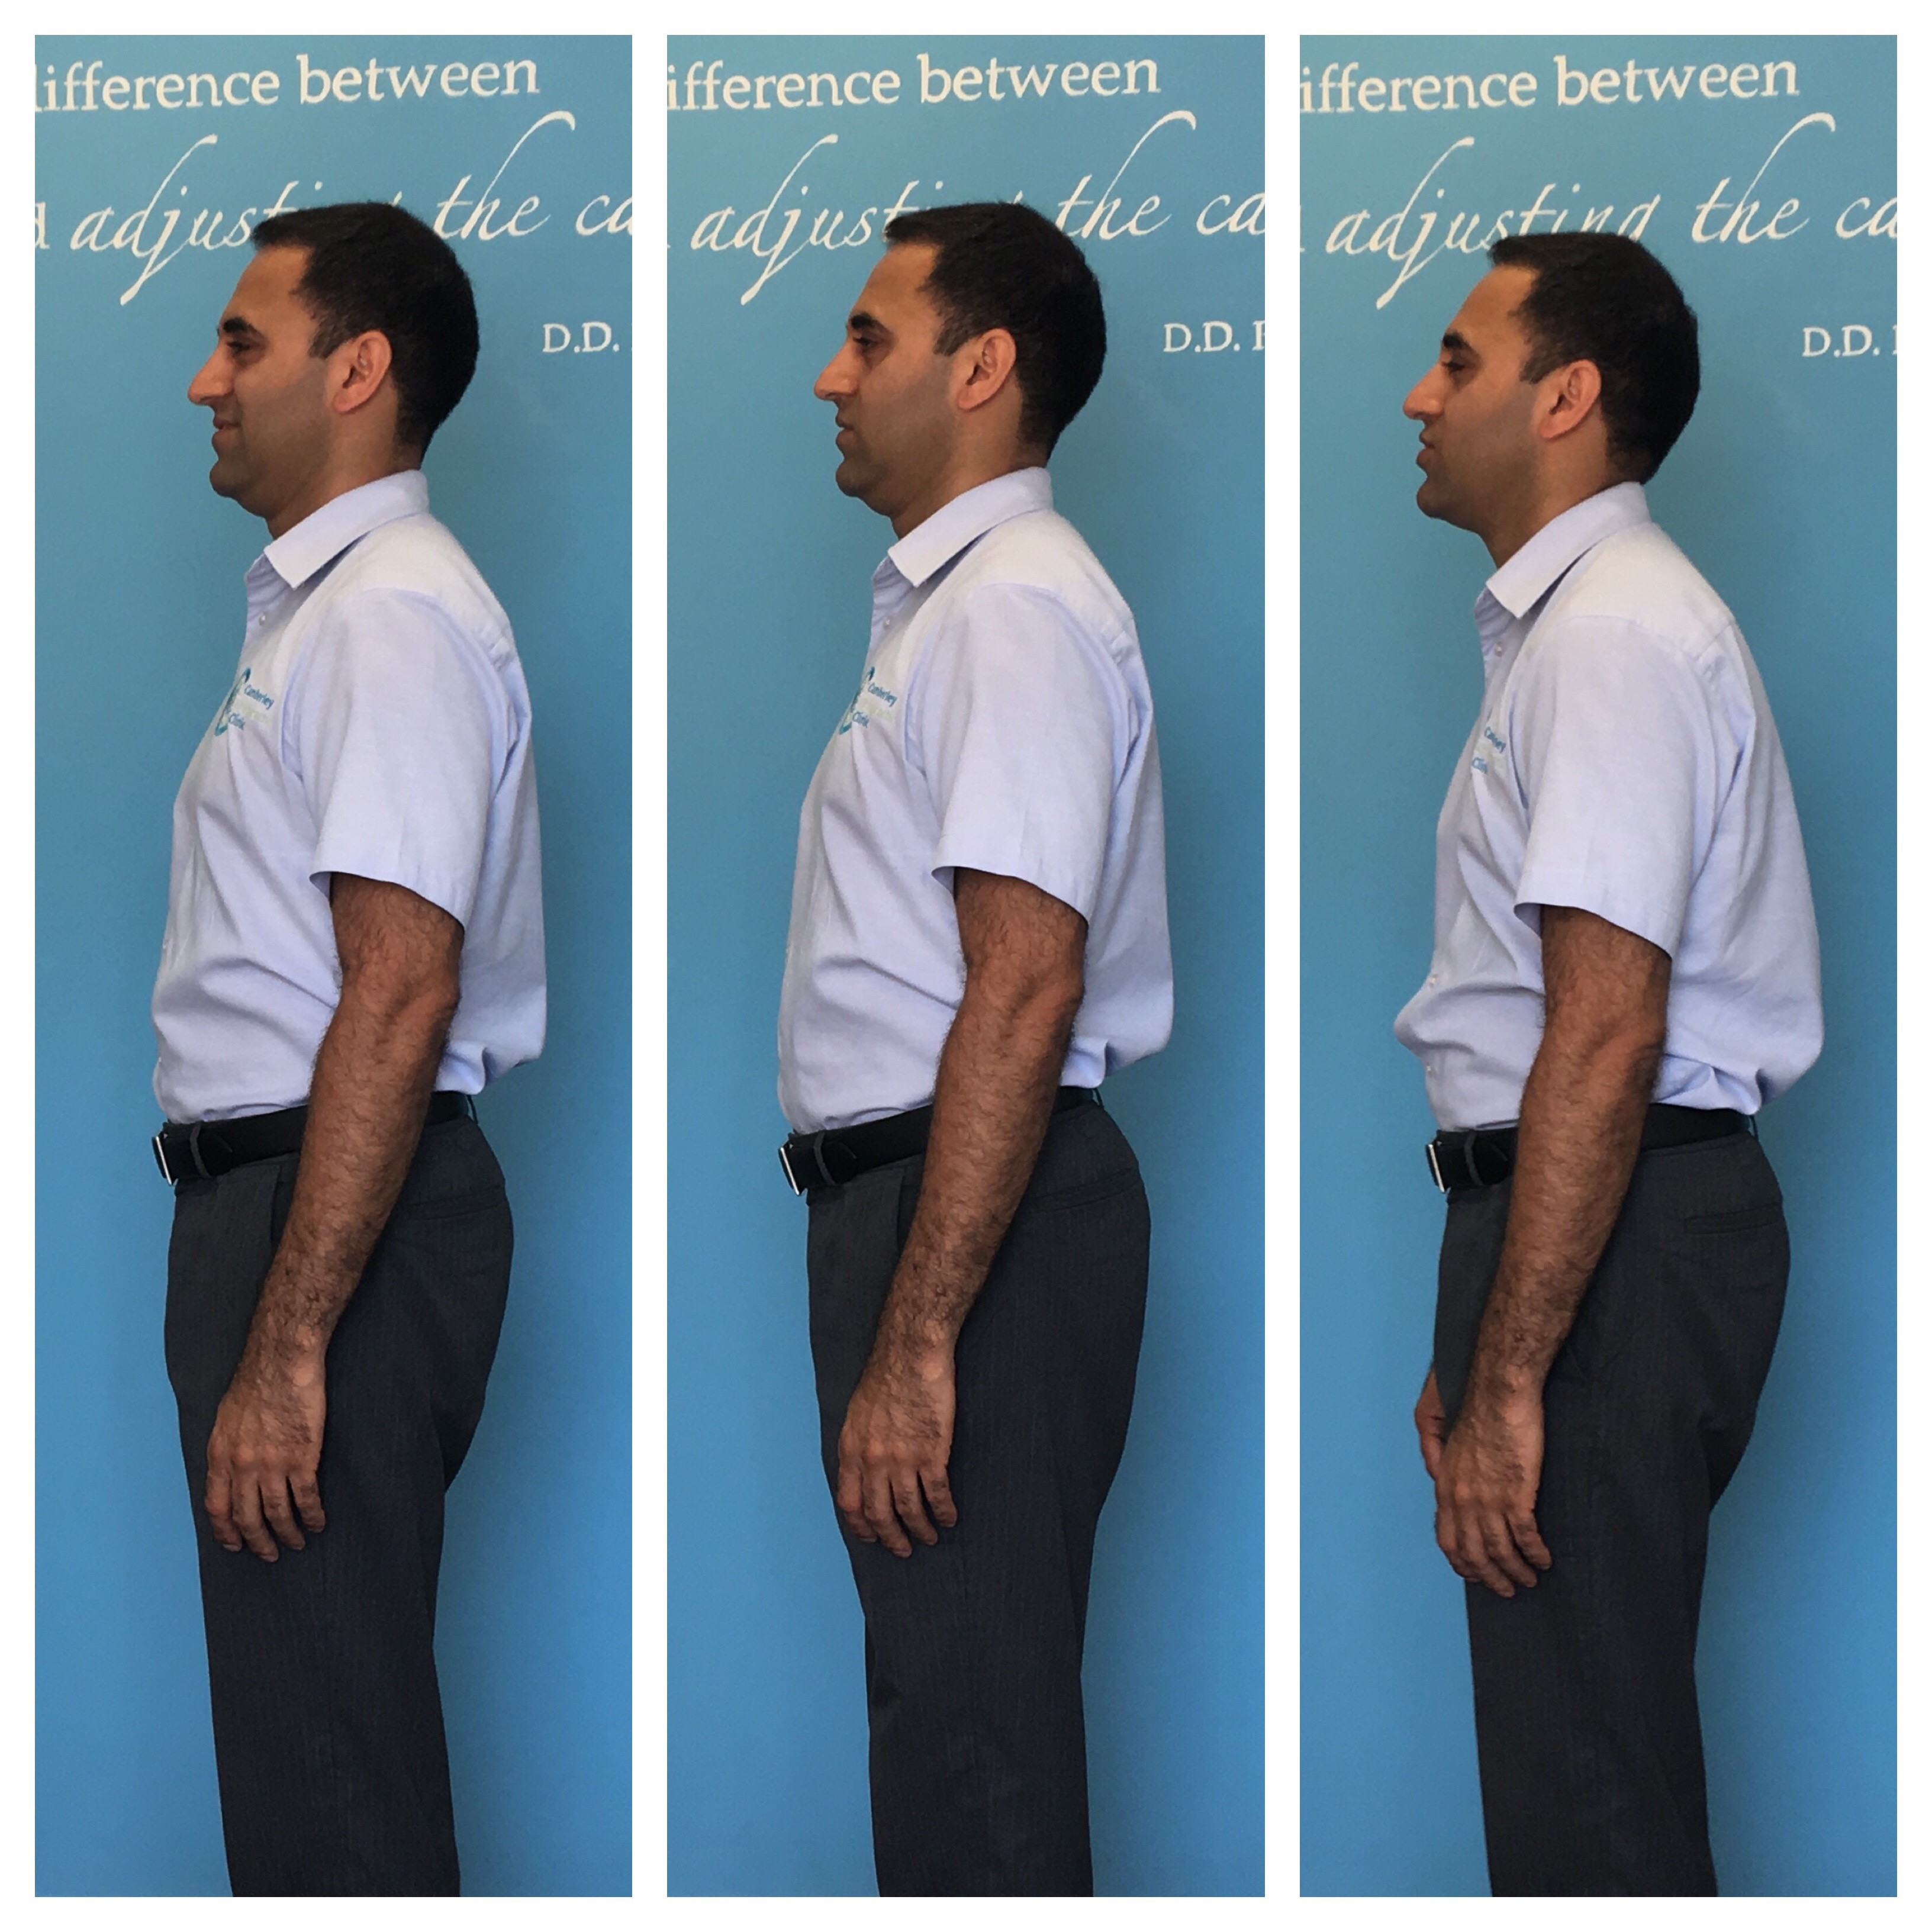 Importance of Good Posture : Types of Posture